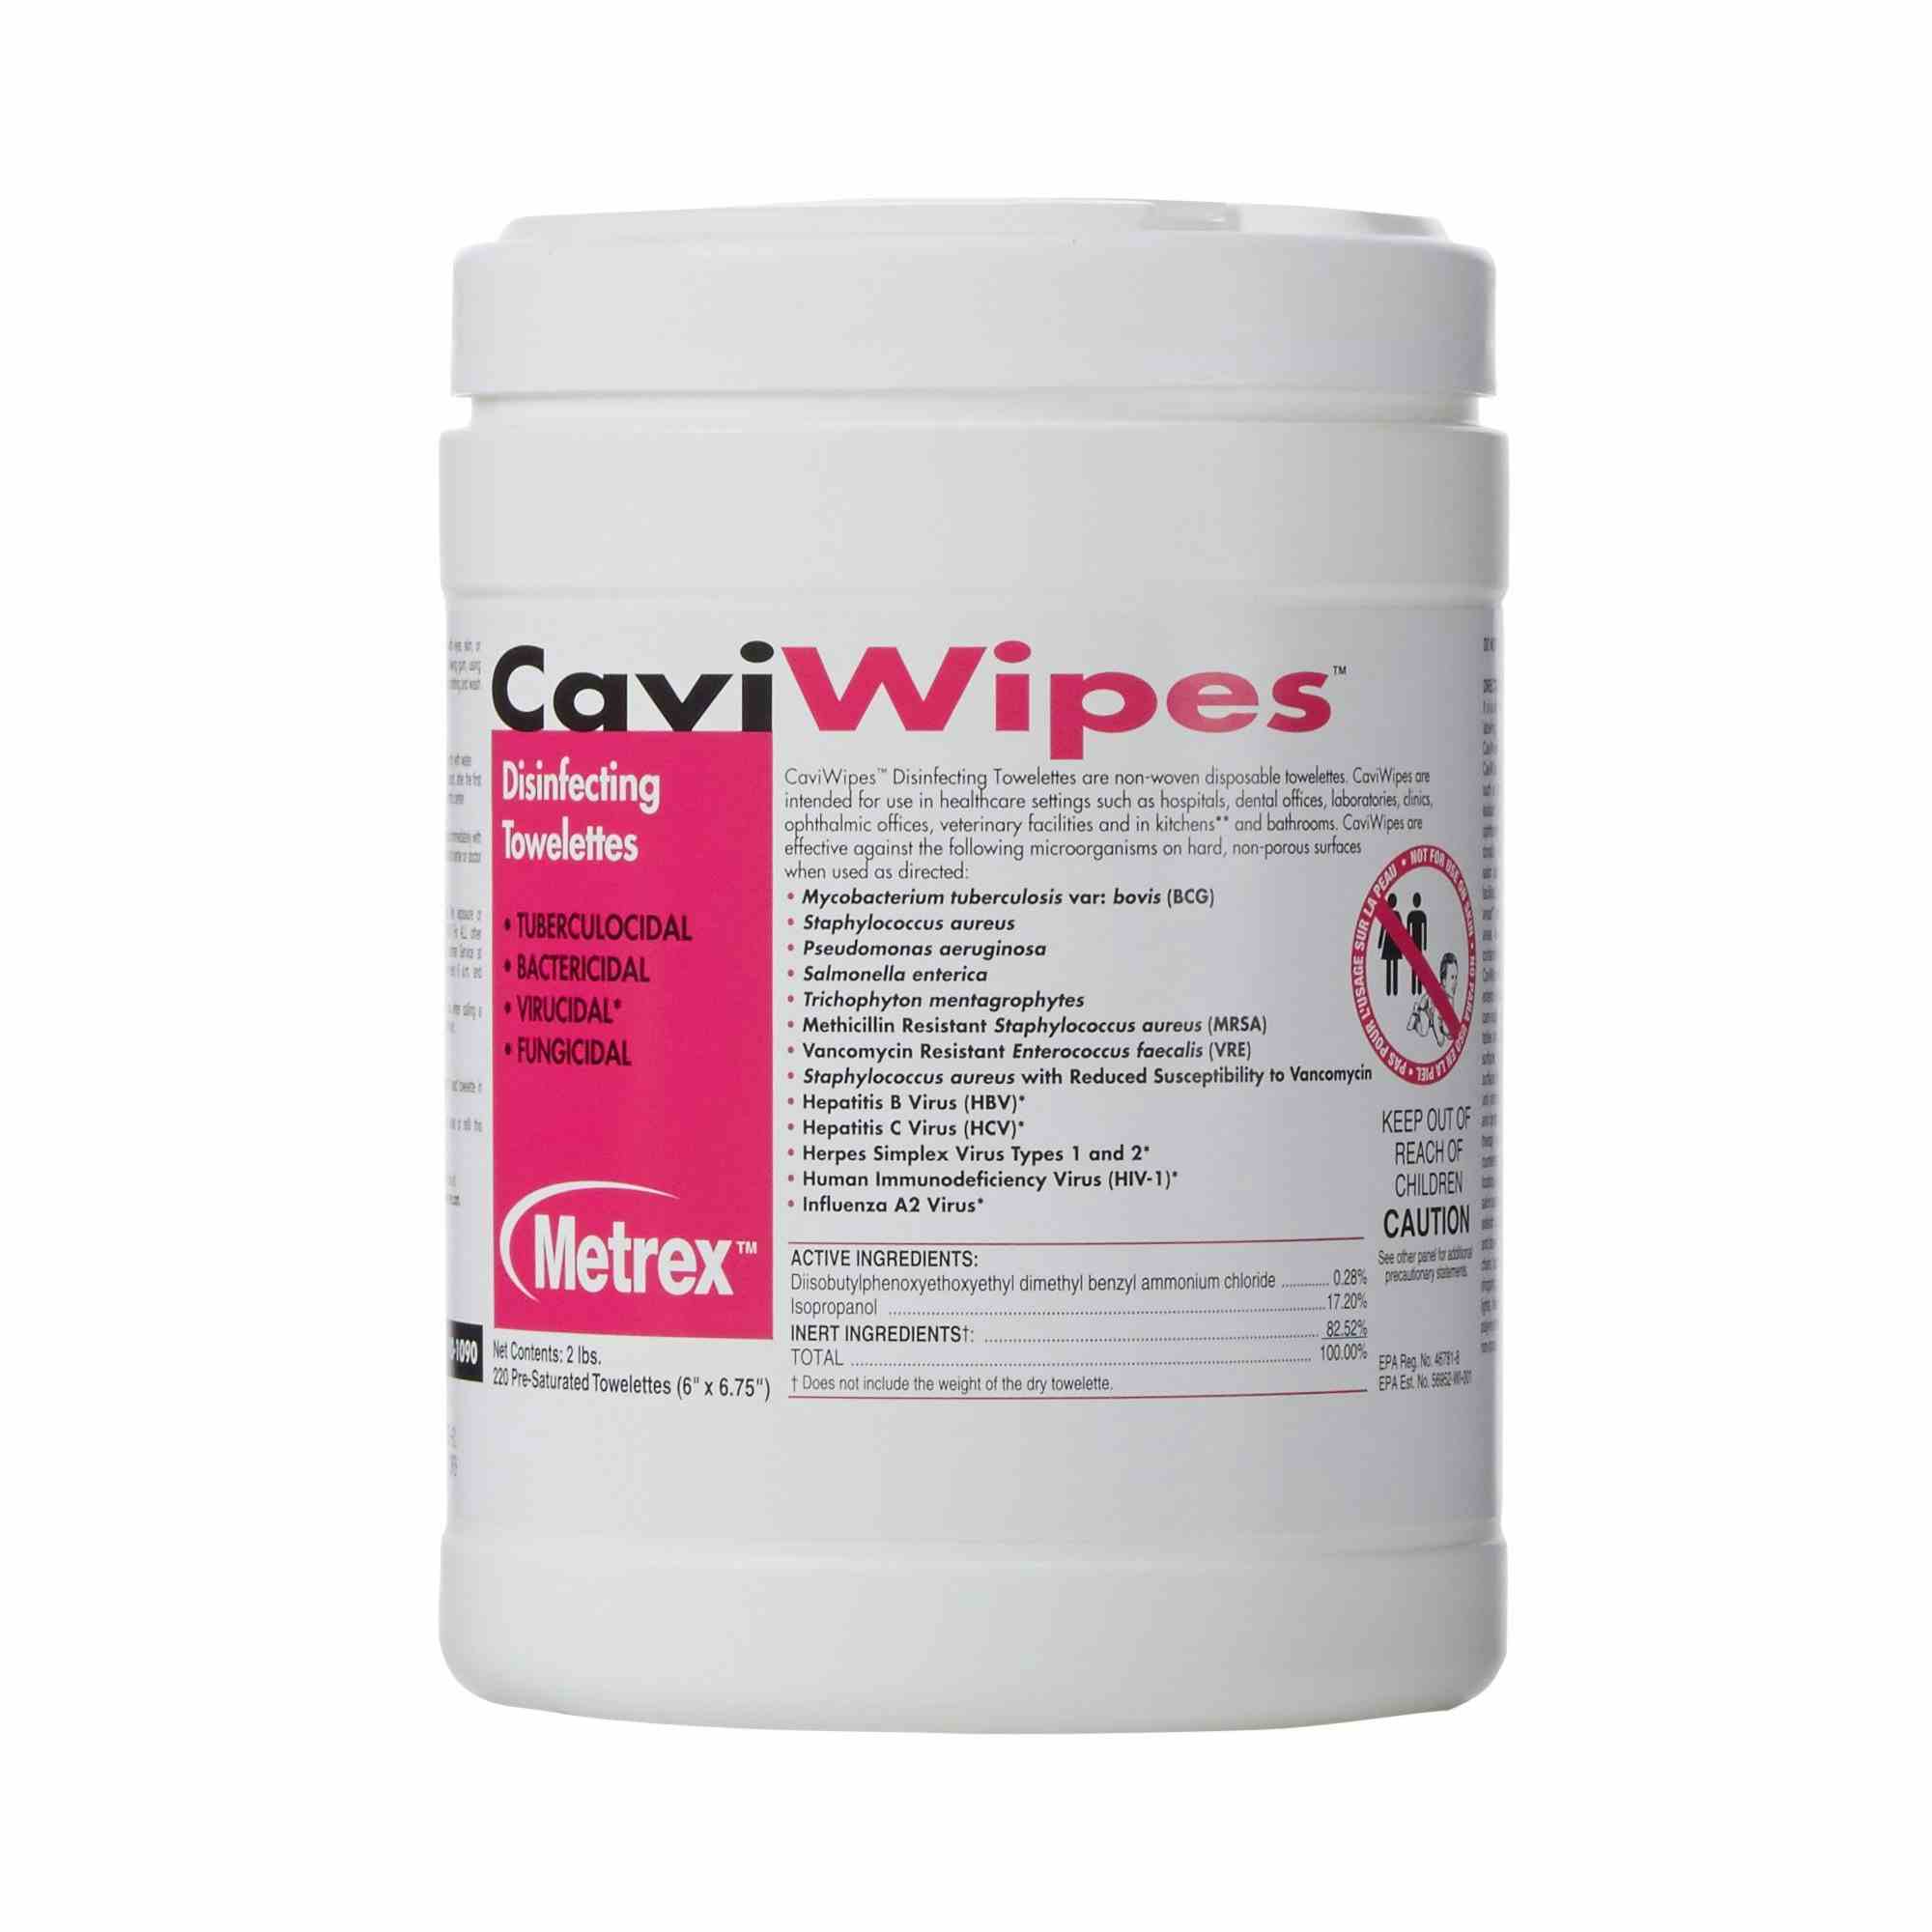 CaviWipes Disinfecting Towelettes, 6 X 6.75", 10-1090, Canister of 220